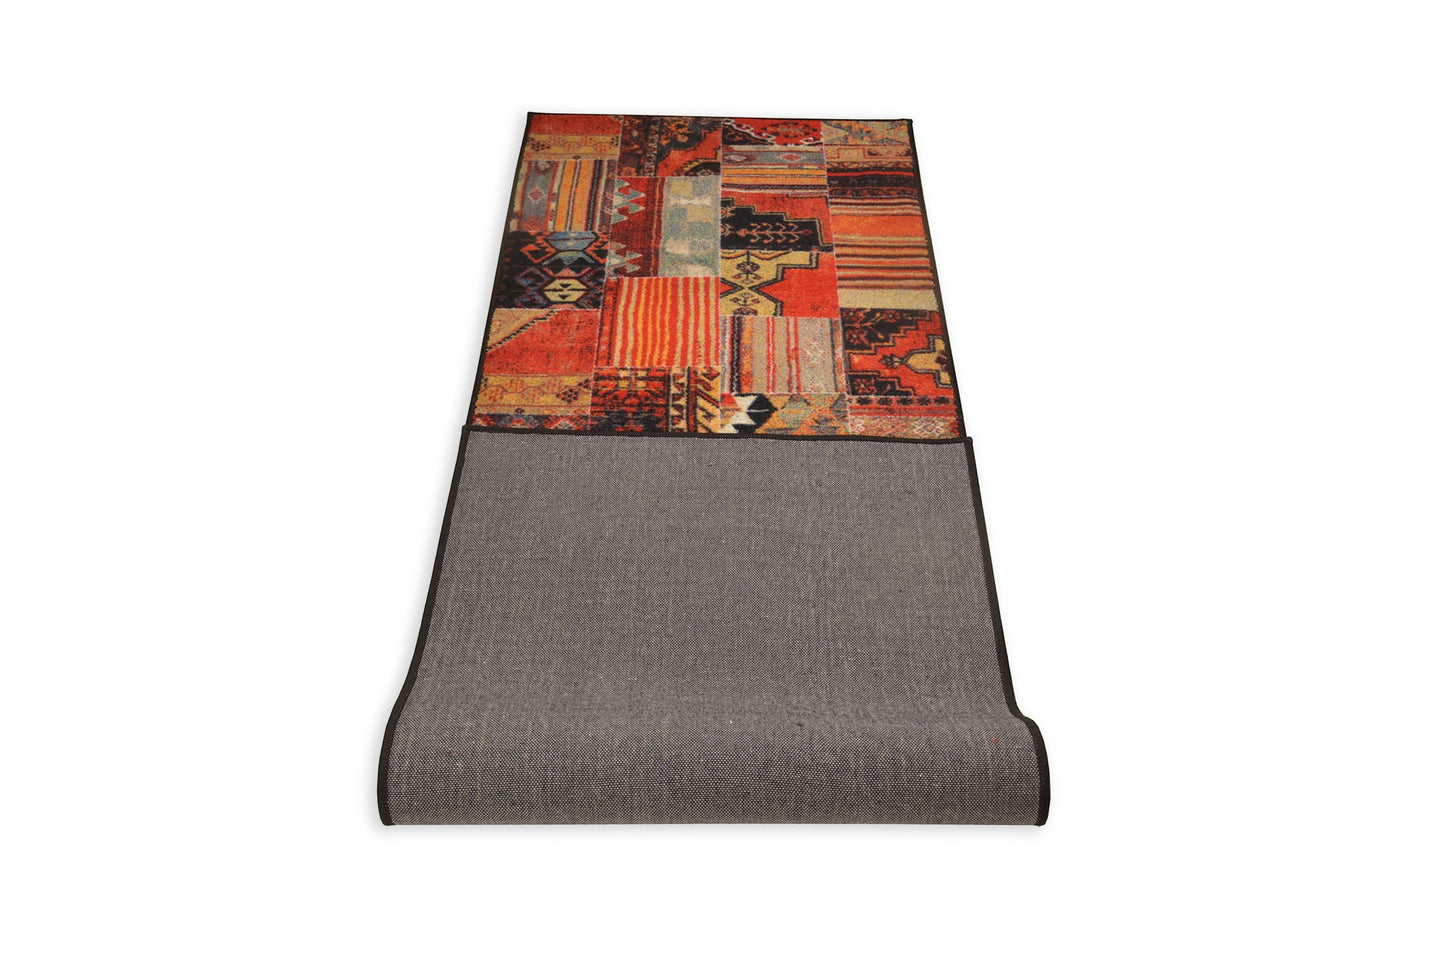 Custom Size Runner Rug Antique Patchwork Kilim Design Natural Cotton Backing Pick Your Own Size By Up to 50 Ft Length, 26", 35" Width